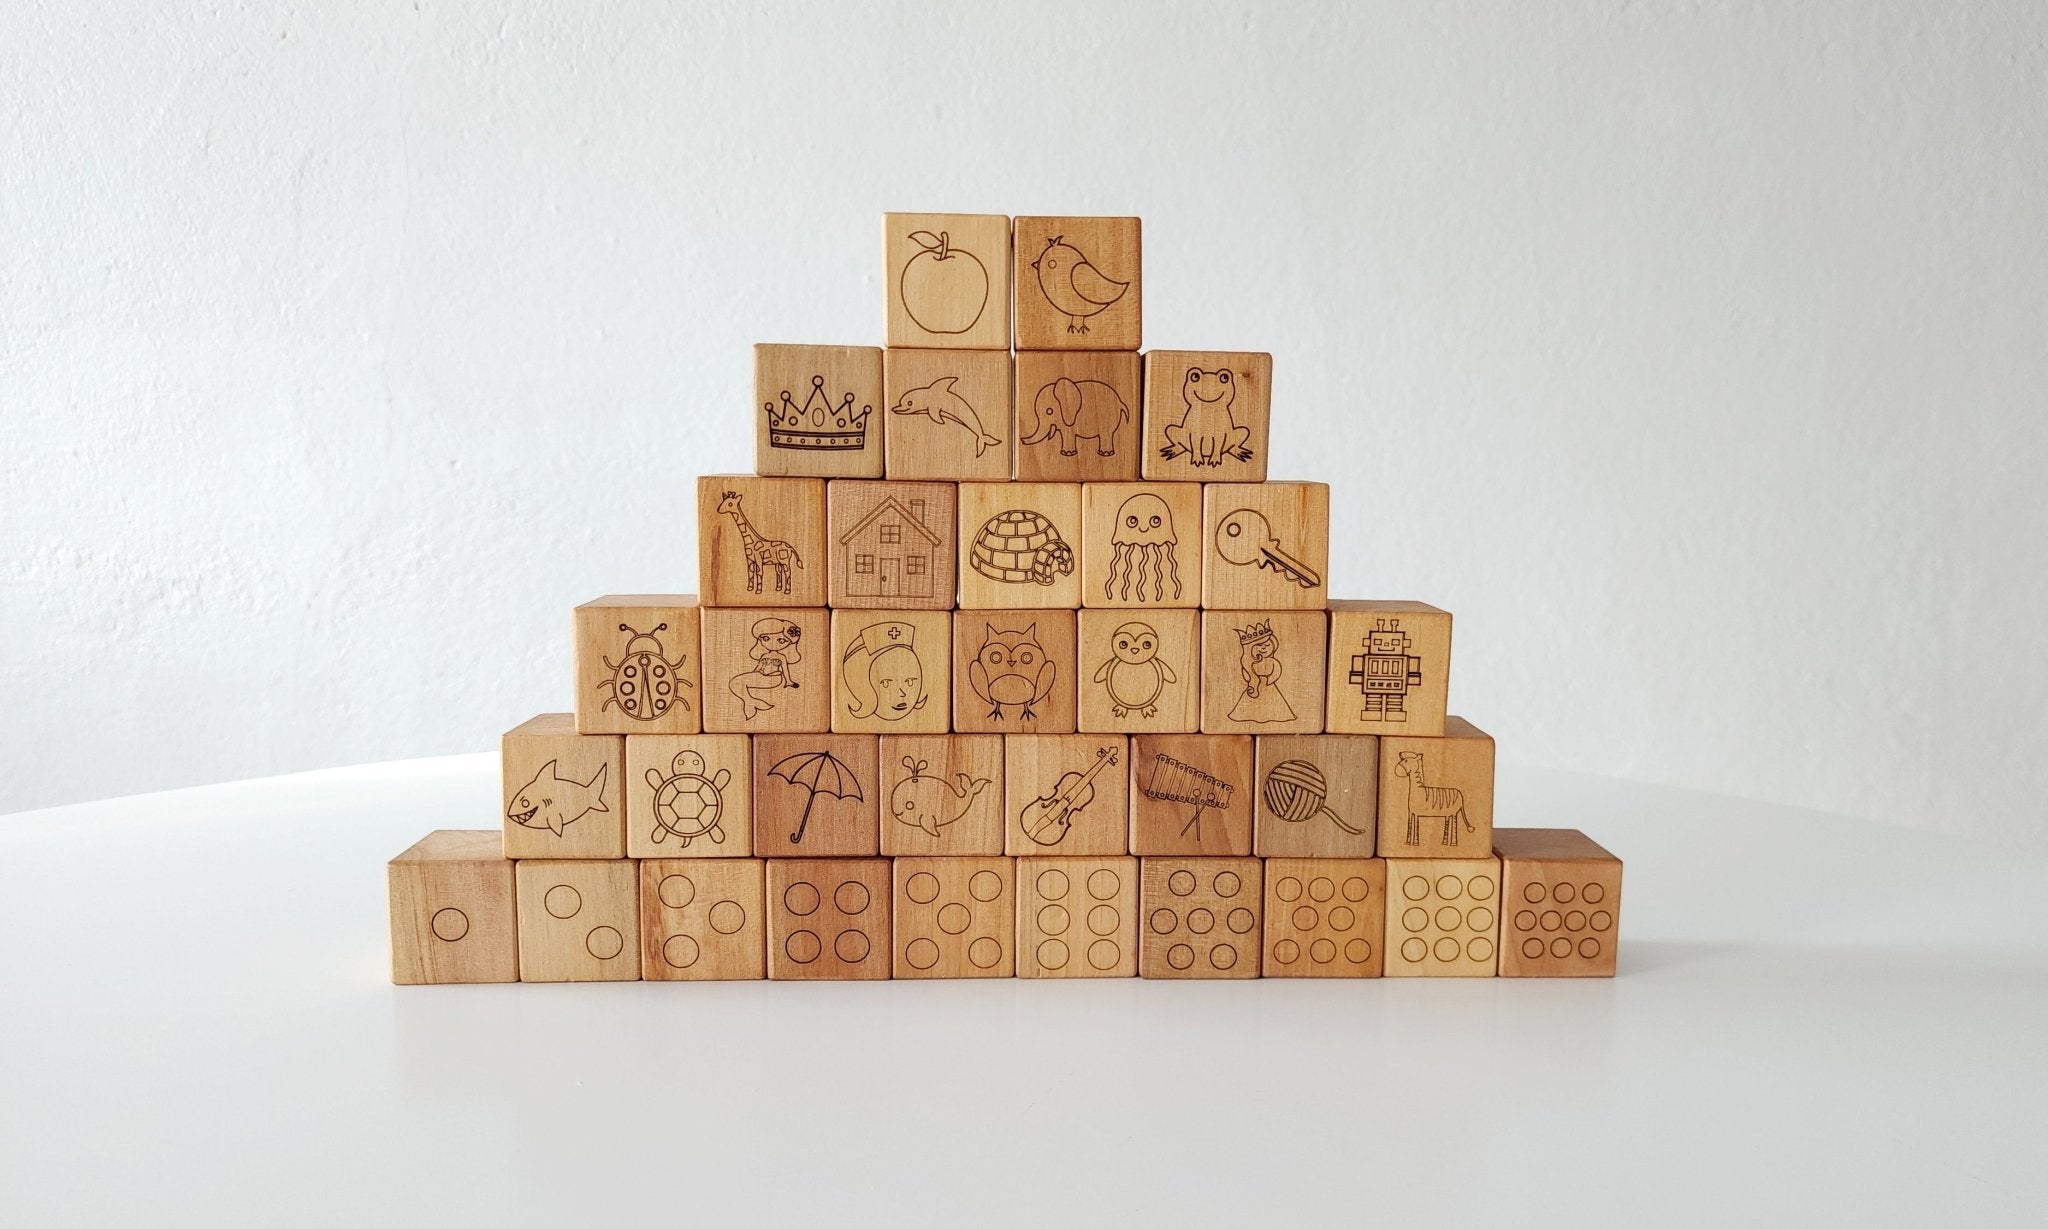 Wooden building blocks by Bannor Toys